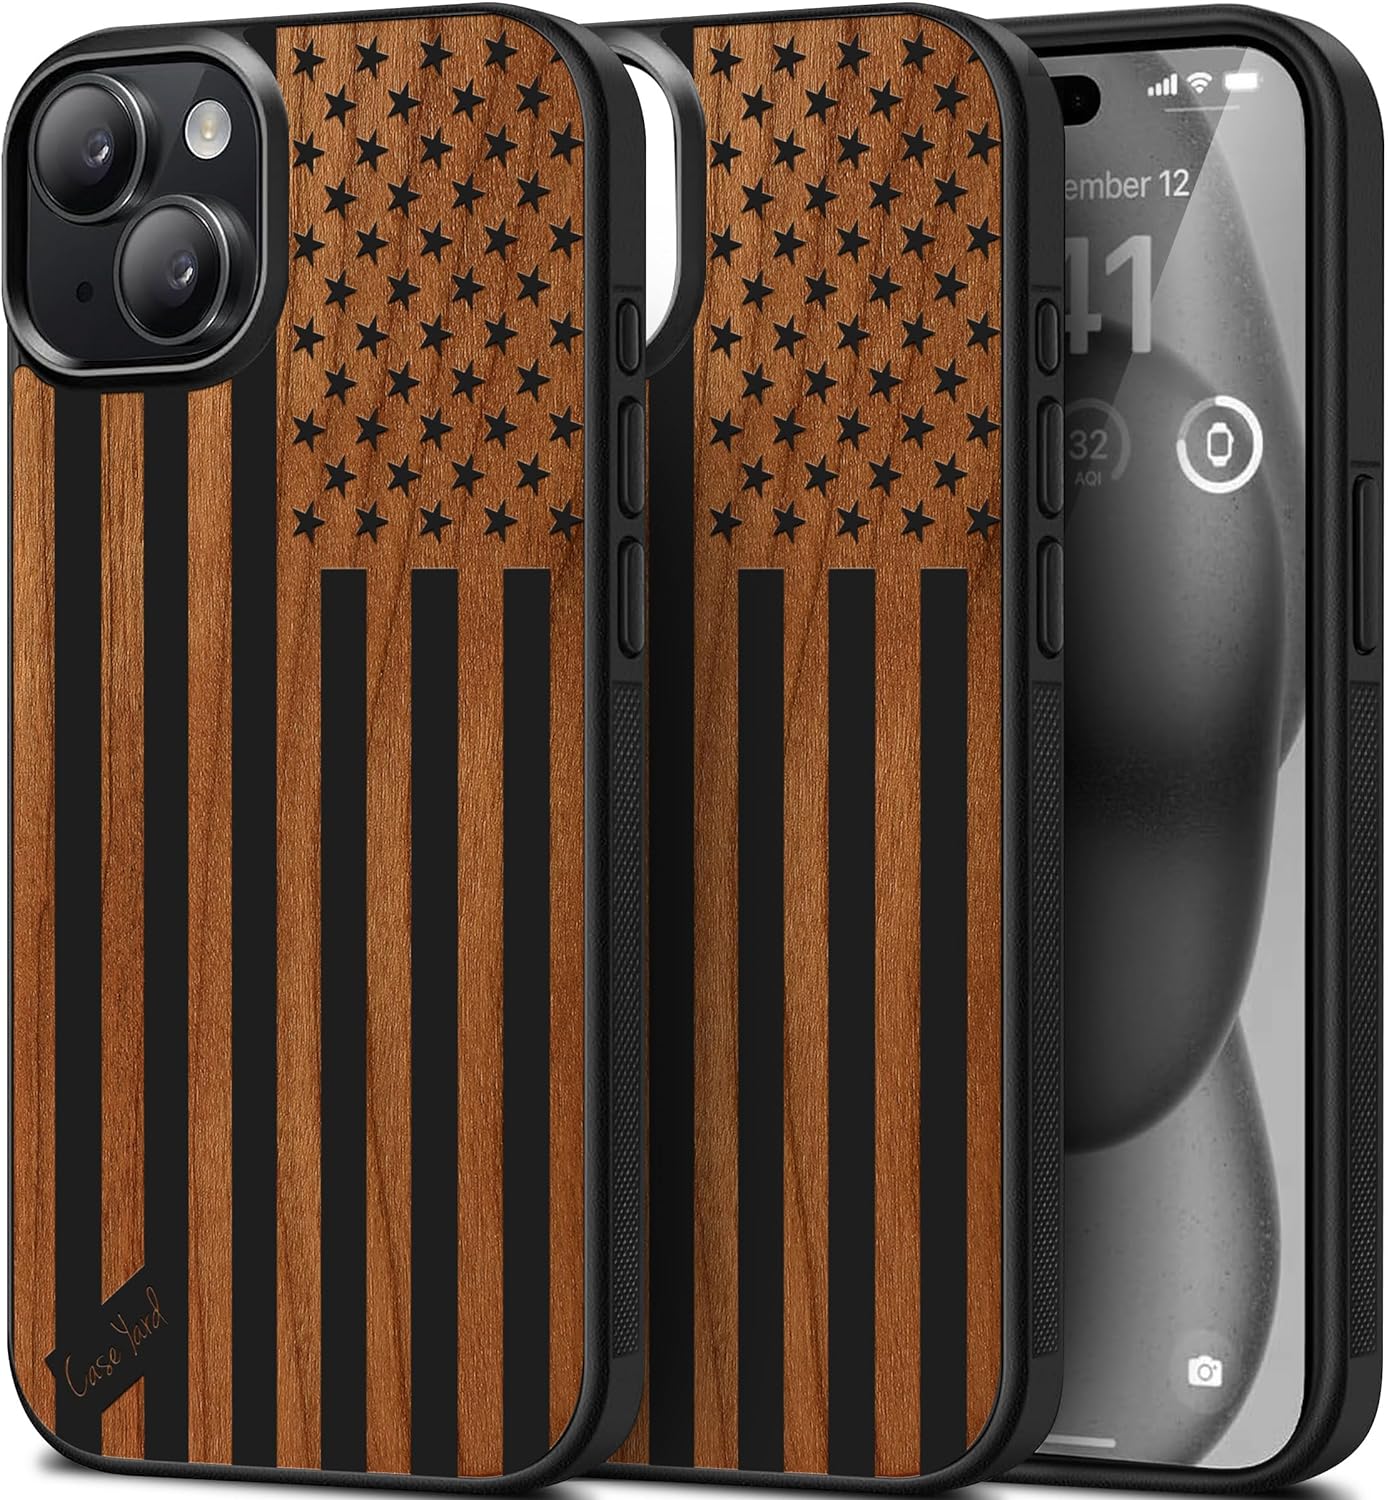 Wooden Cell Phone Case Cover, Laser Engraved case for iPhone American Flag Design